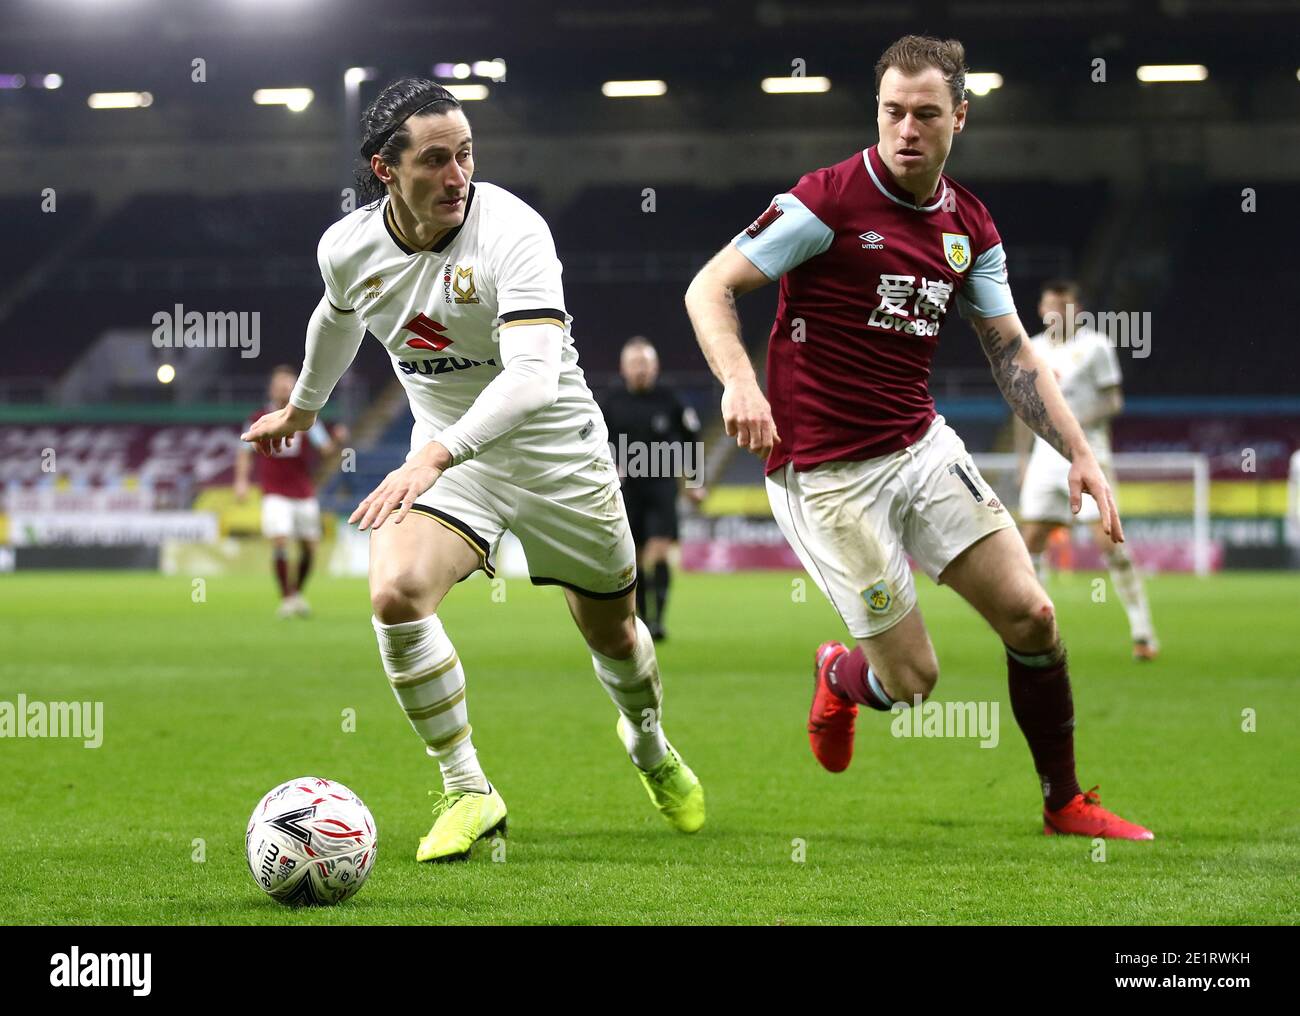 Milton Keynes Dons' George Williams (left) nd Burnley's Ashley Barnes battle for the ball during the Emirates FA Cup third round match at Turf Moor, Burnley. Stock Photo